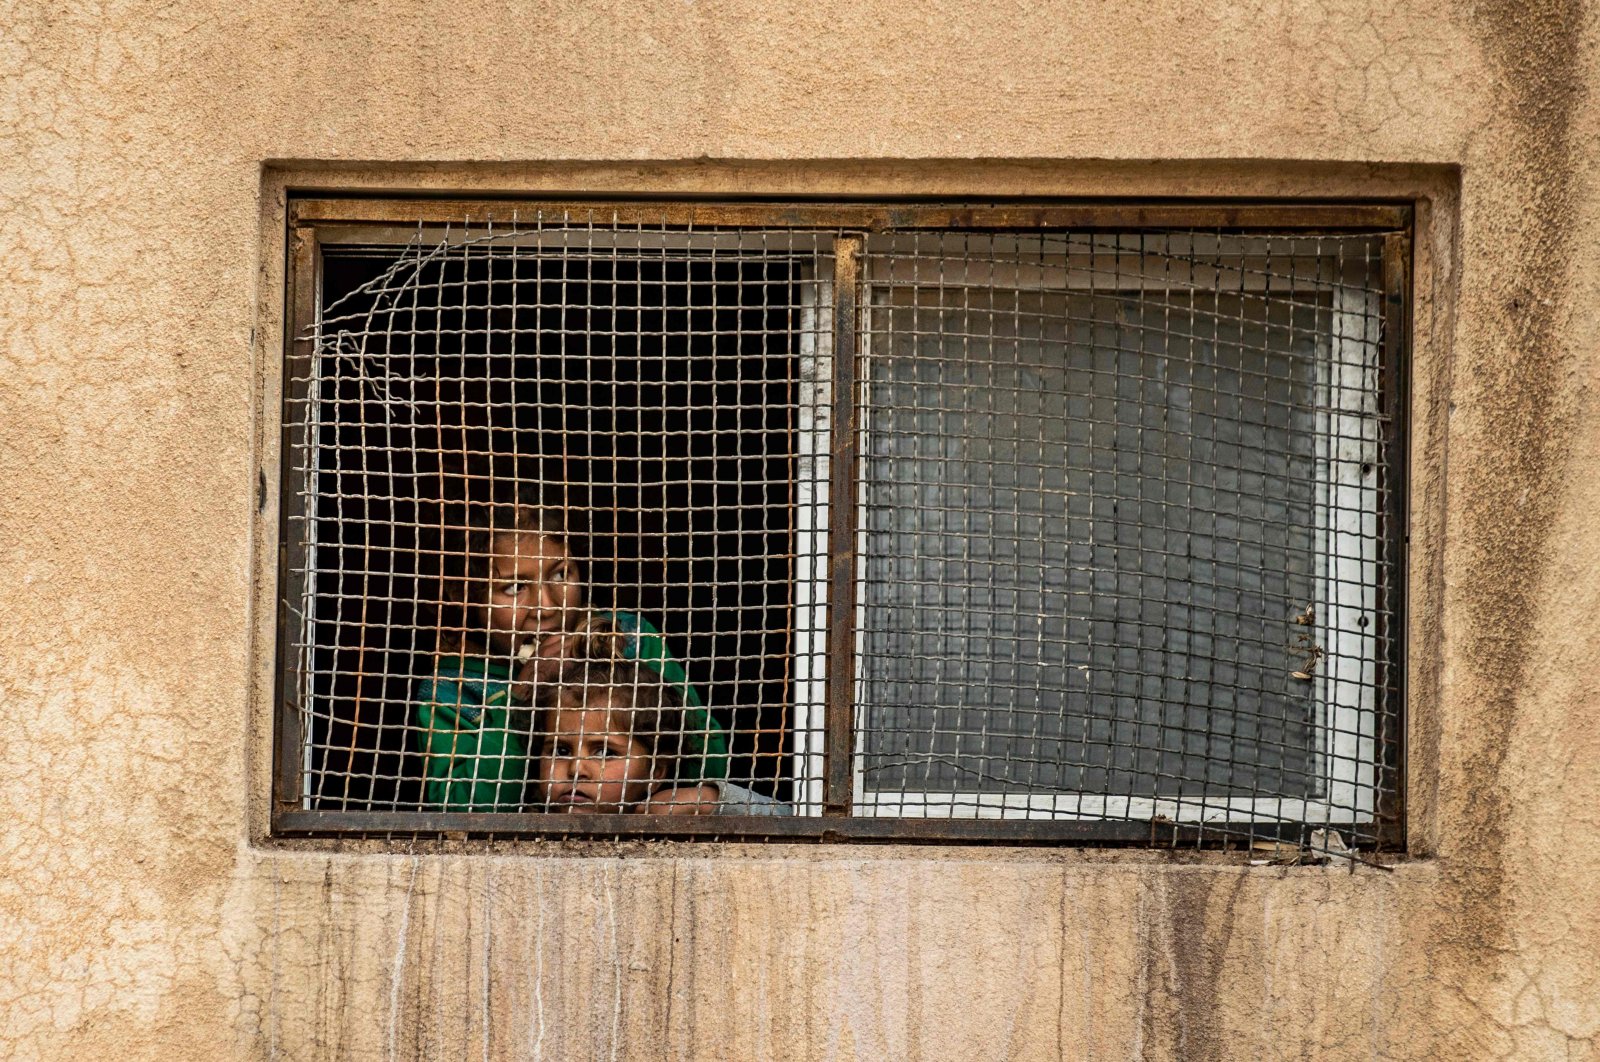 Displaced Syrians stand in a shelter in the northeastern city of  Hasakah, Syria, on Sunday, April 5, 2020 (AFP Photo)